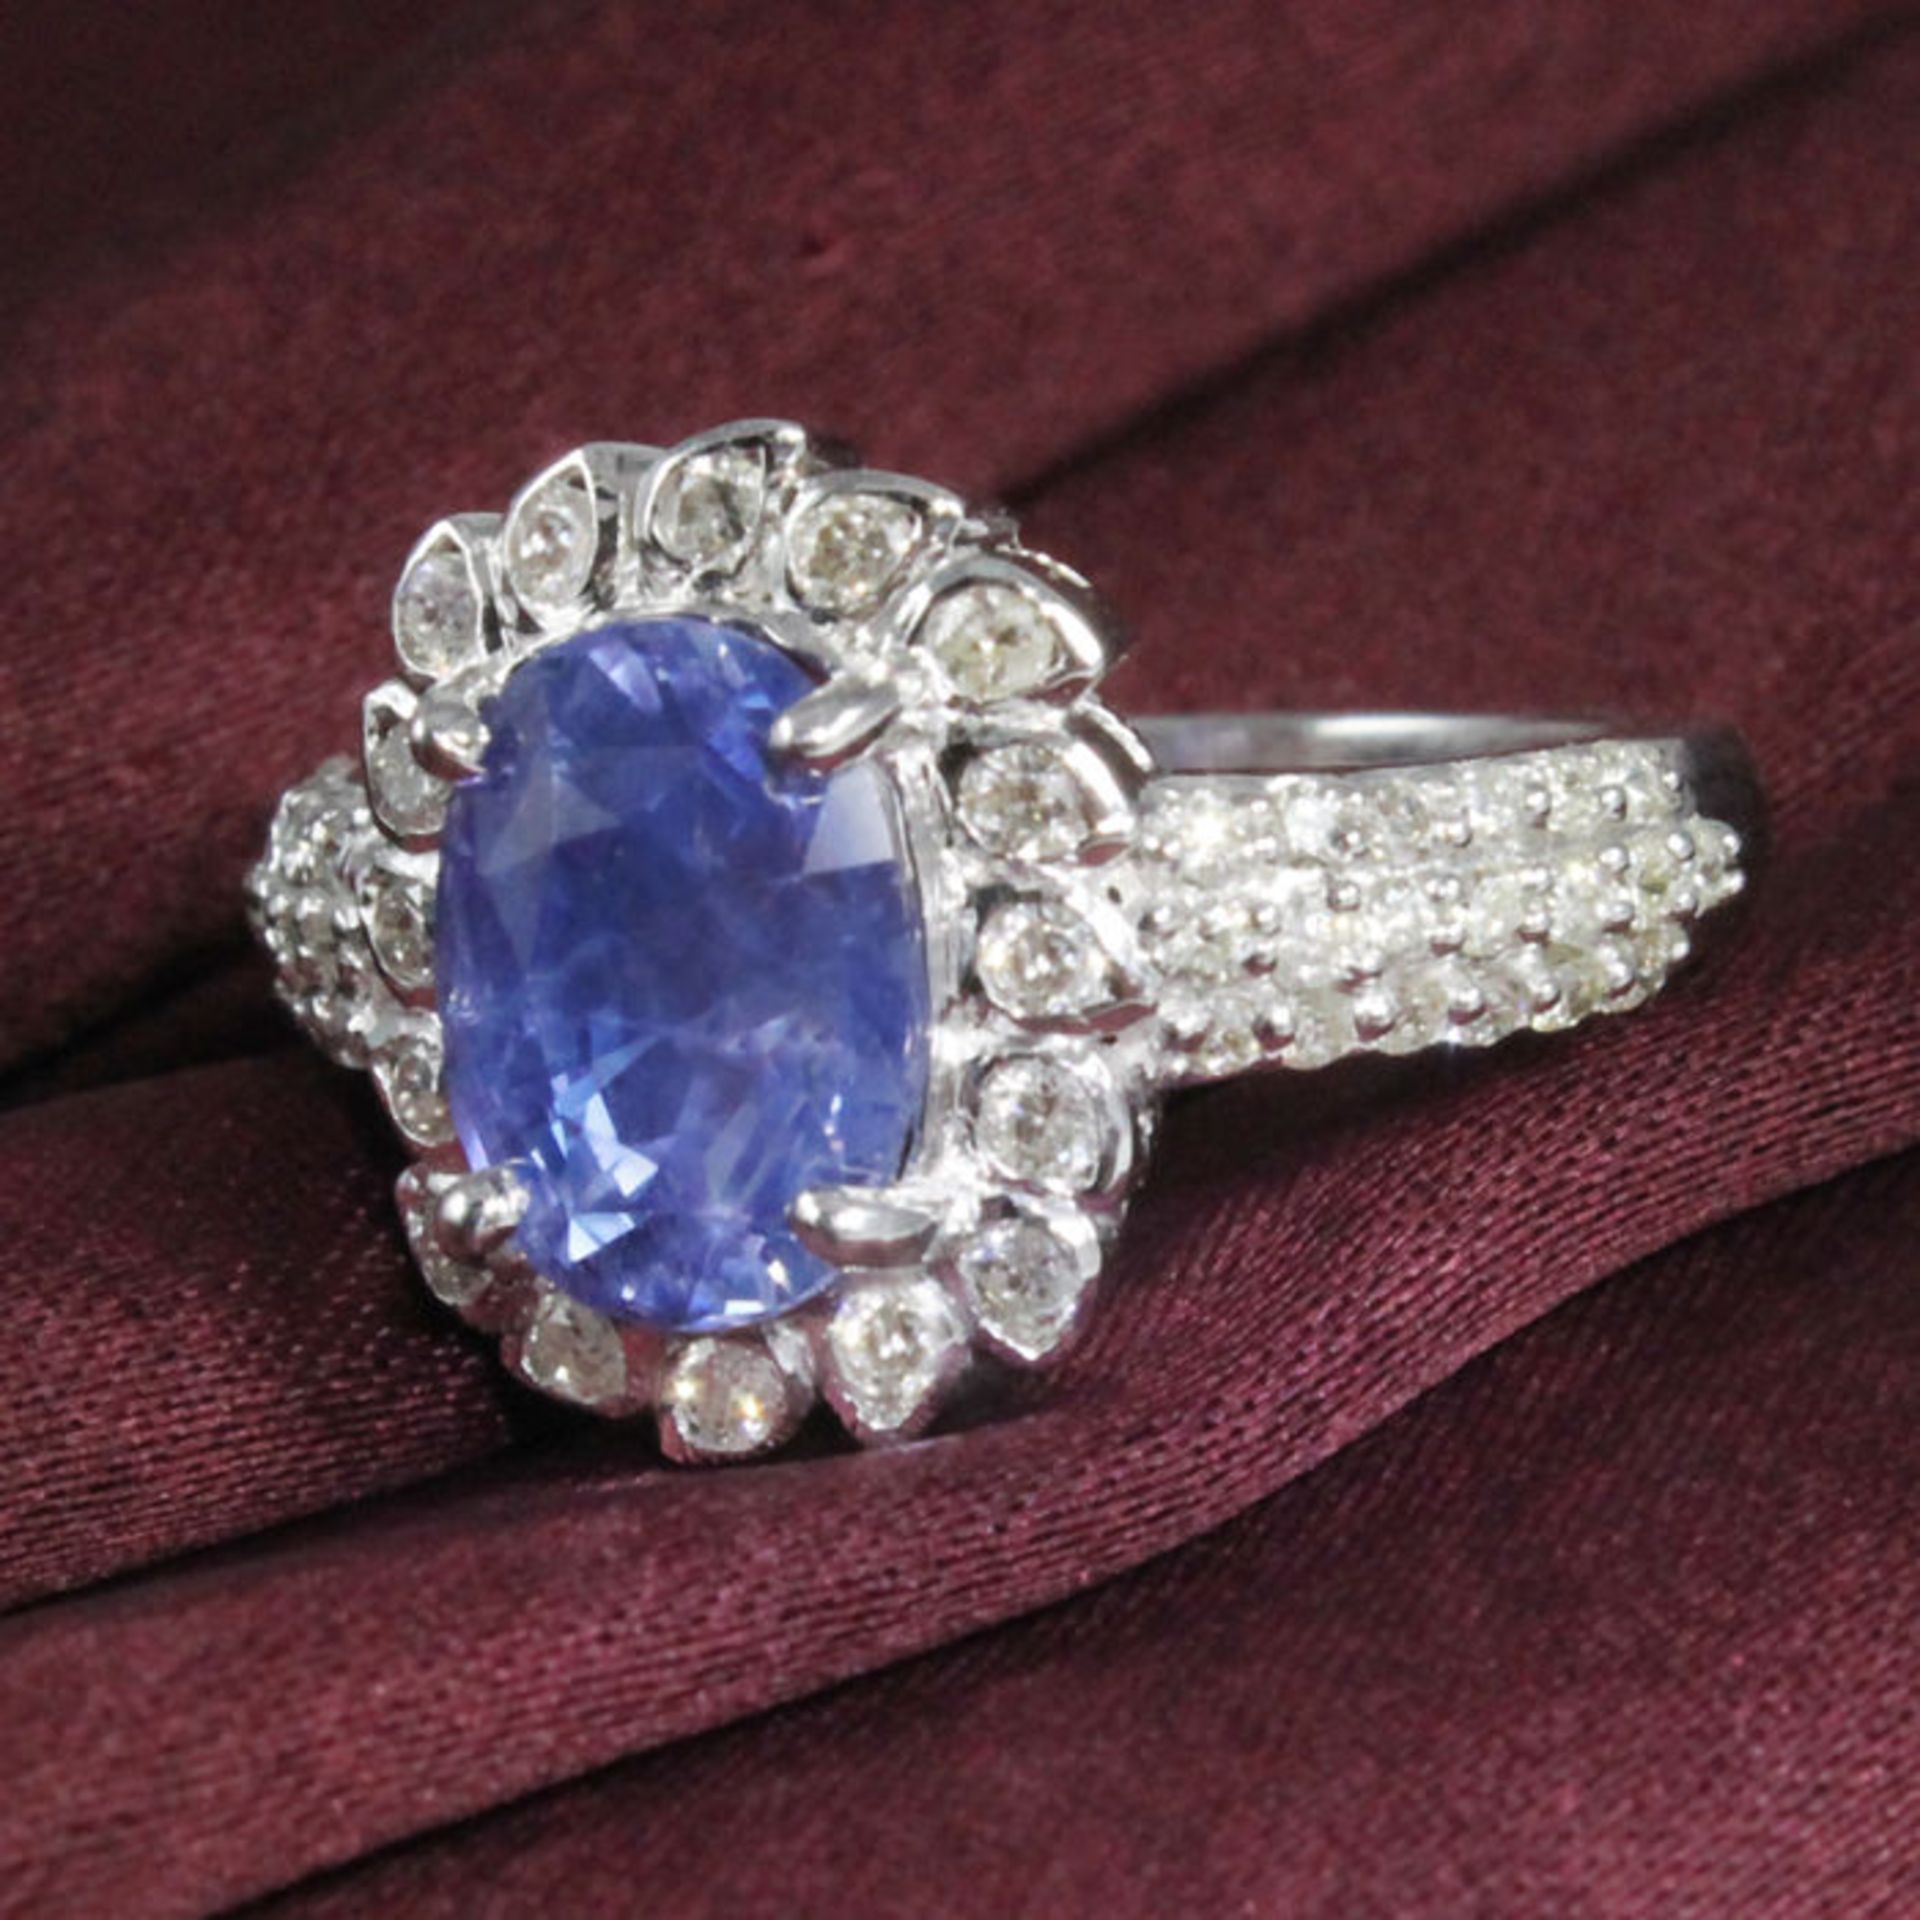 IGI Certified 14 K Very Exclusive Designer White Gold Blue Sapphire and Diamond Ring - Image 6 of 7